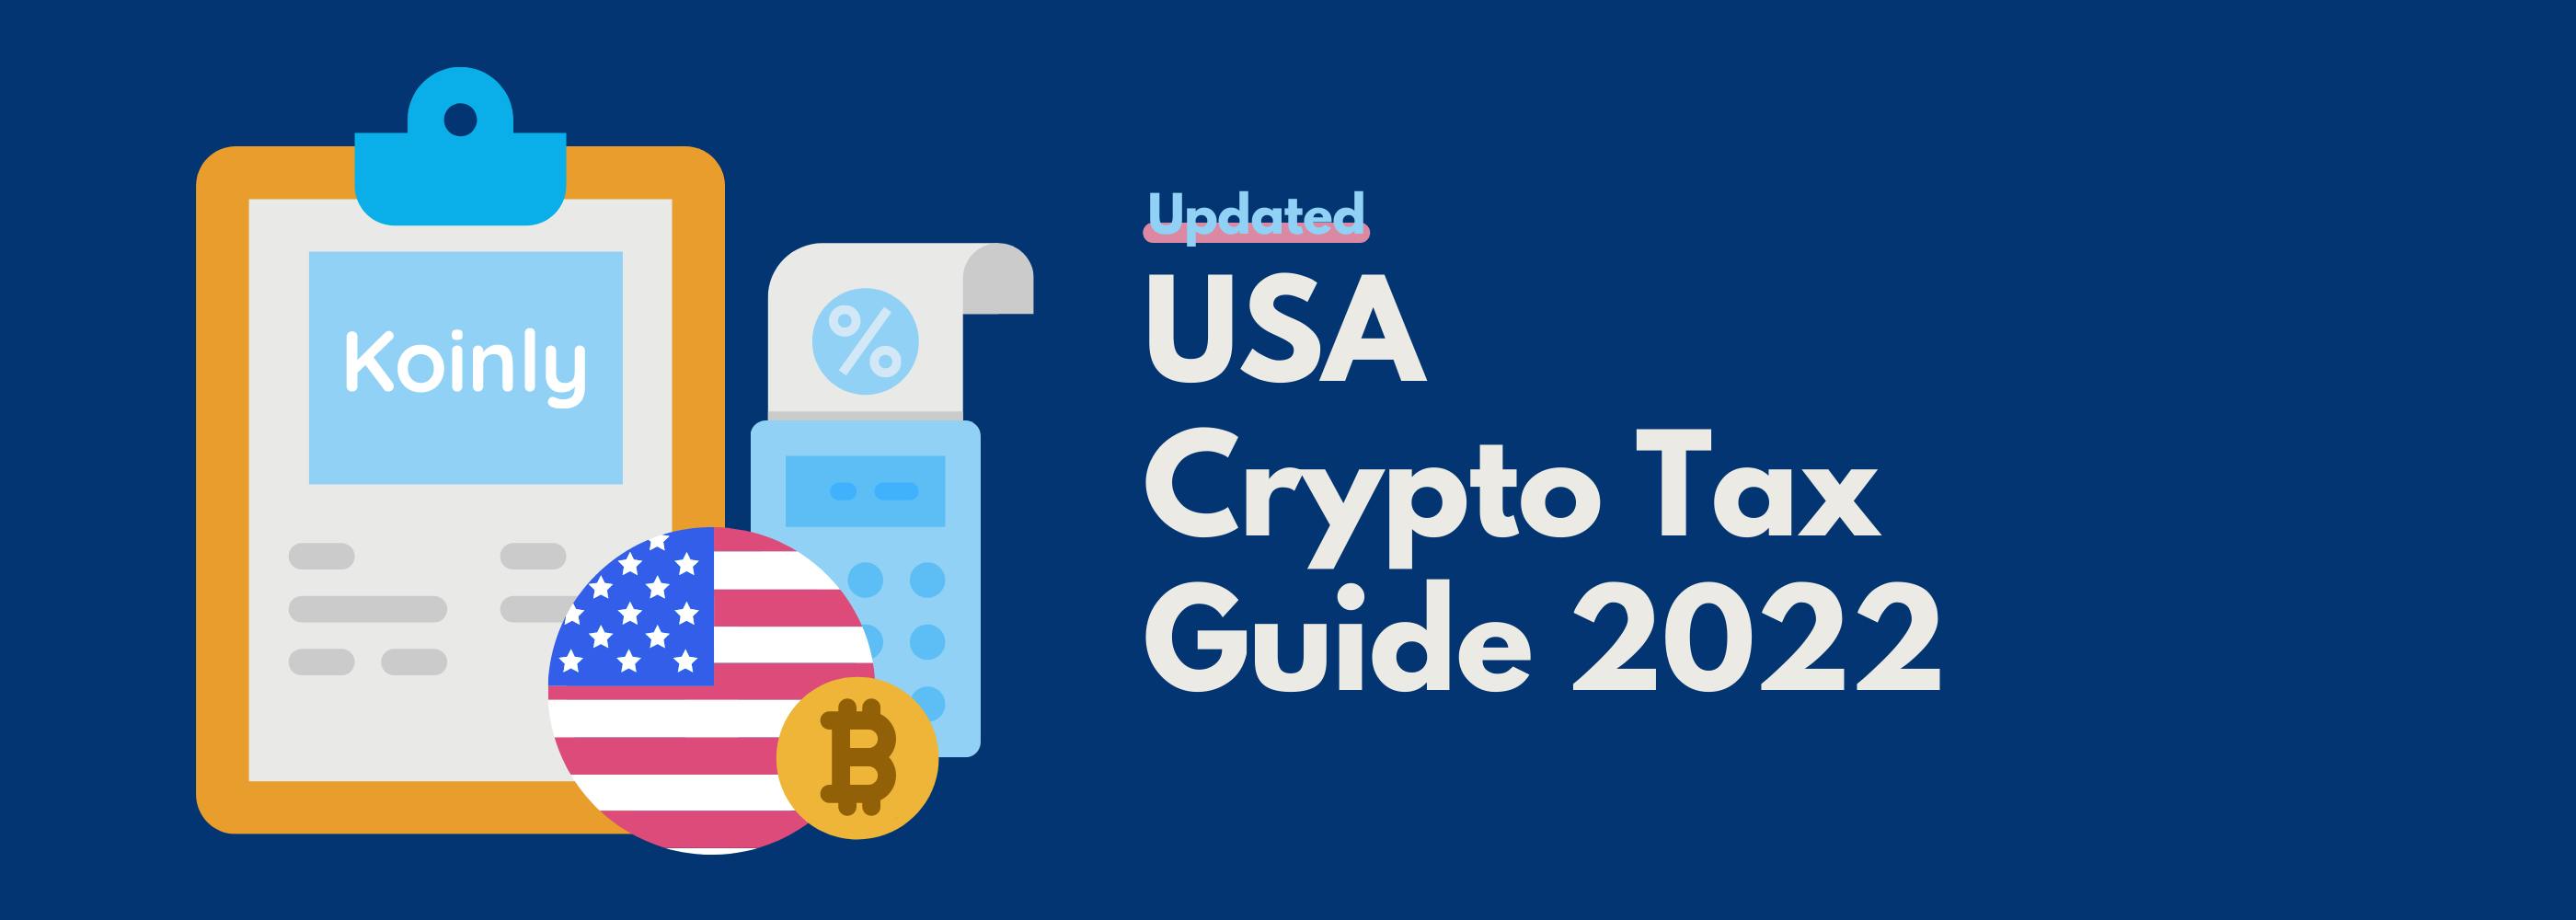 US Crypto Tax Guide 2022